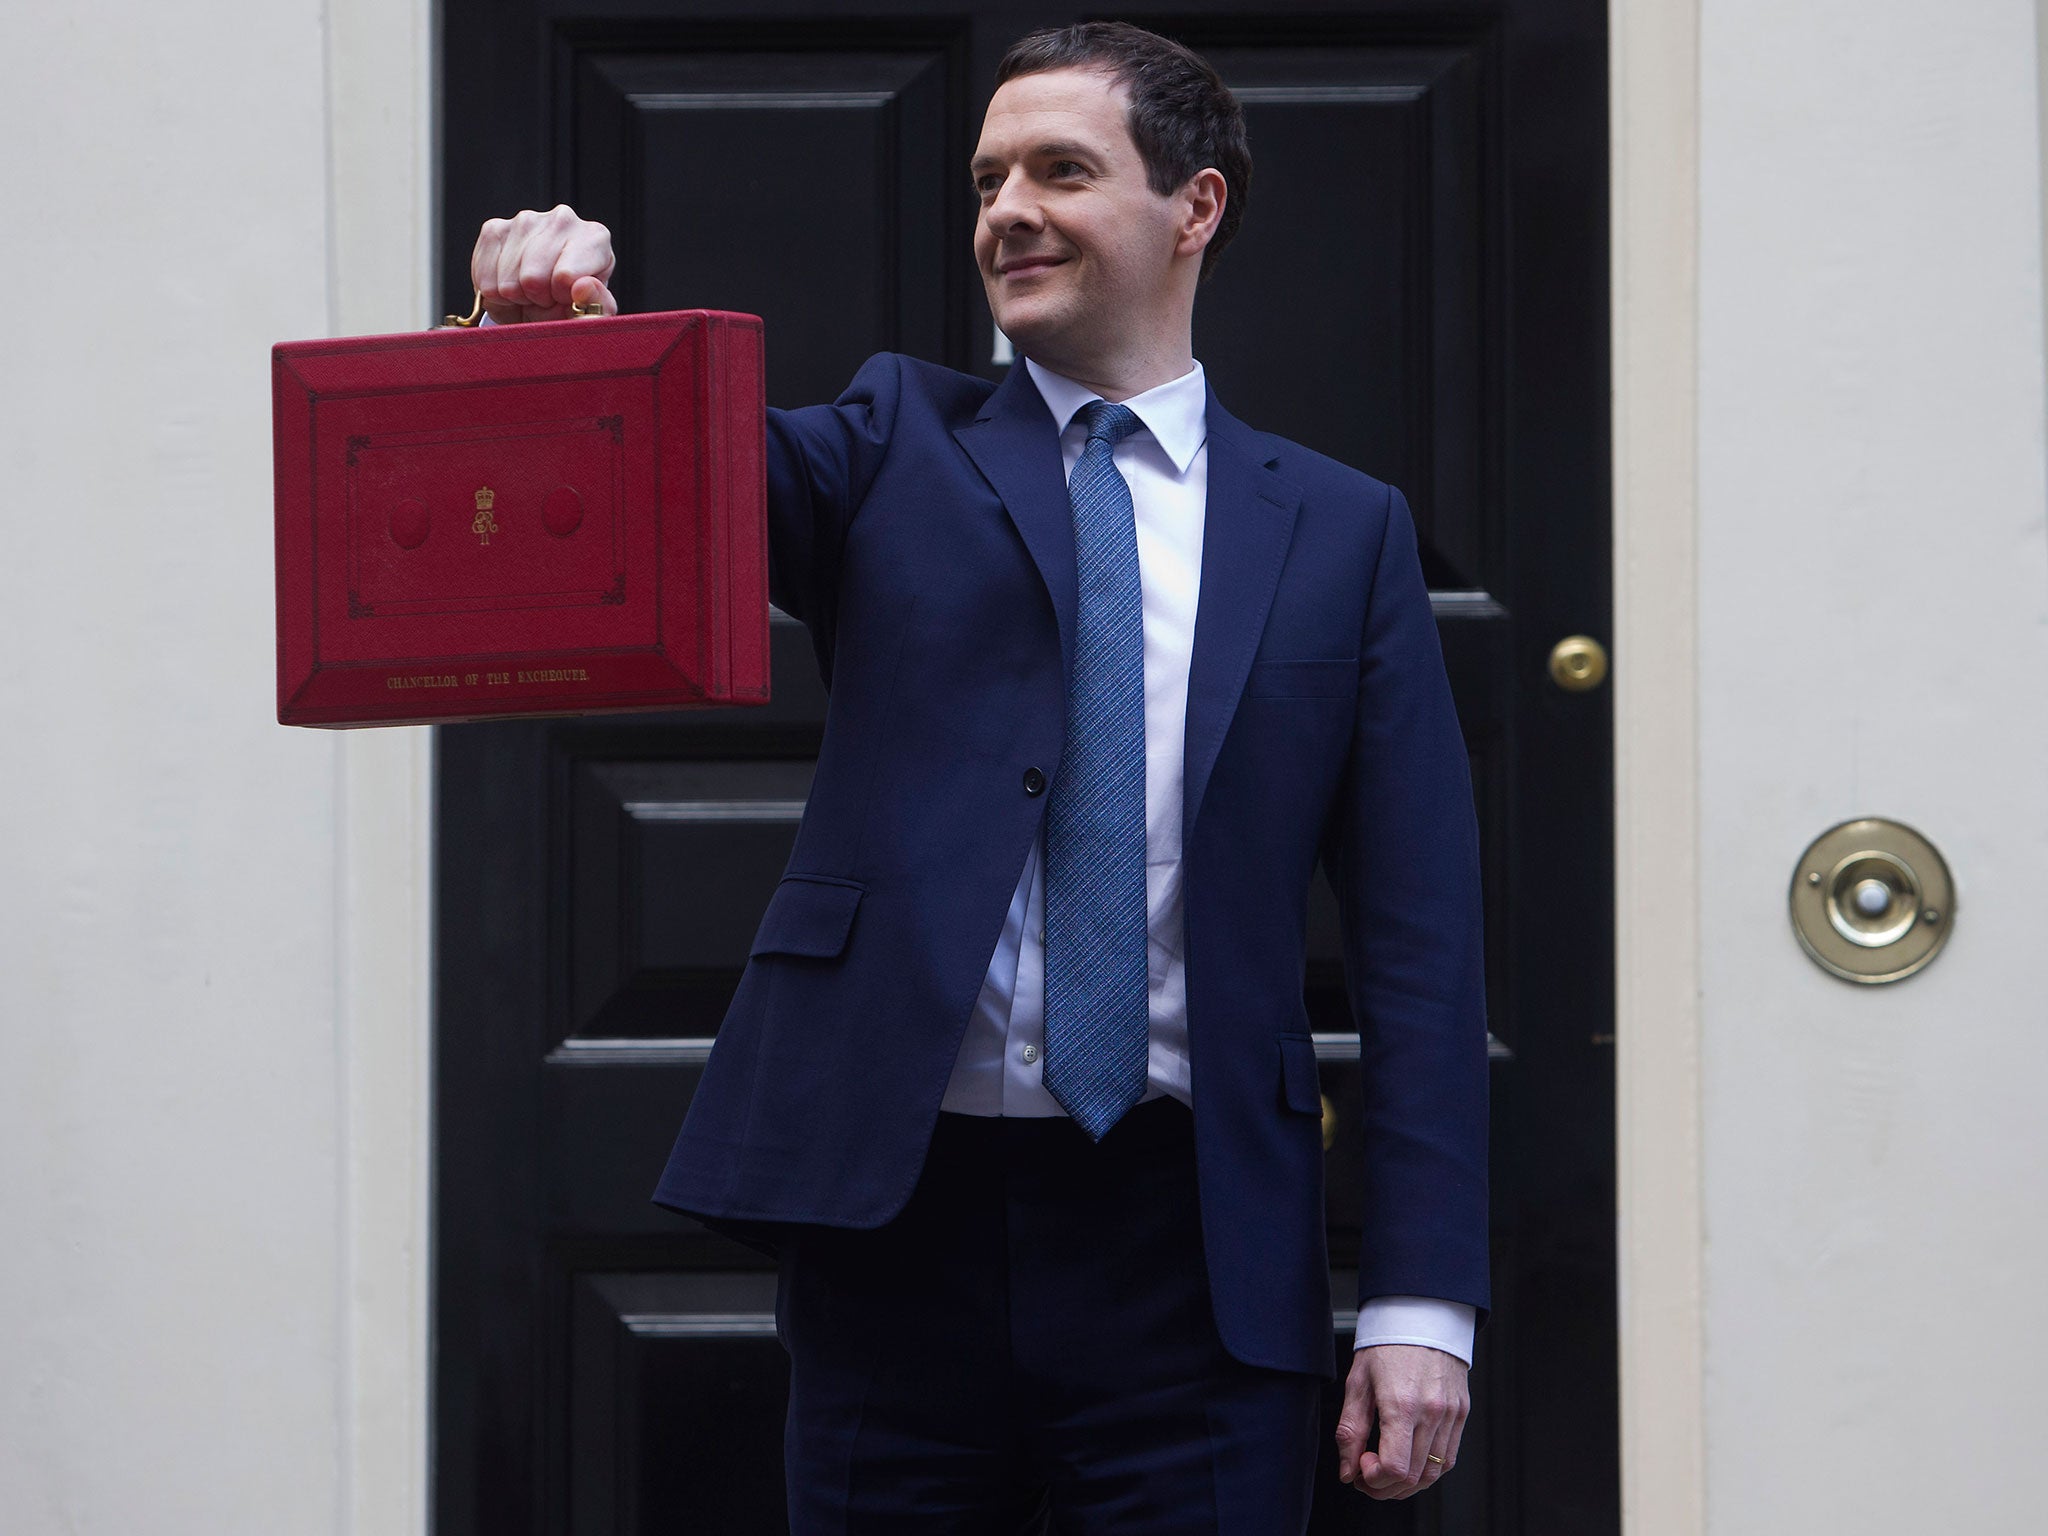 Finance Minister George Osborne poses for pictures with the Budget Box as he leaves 11 Downing Street in London